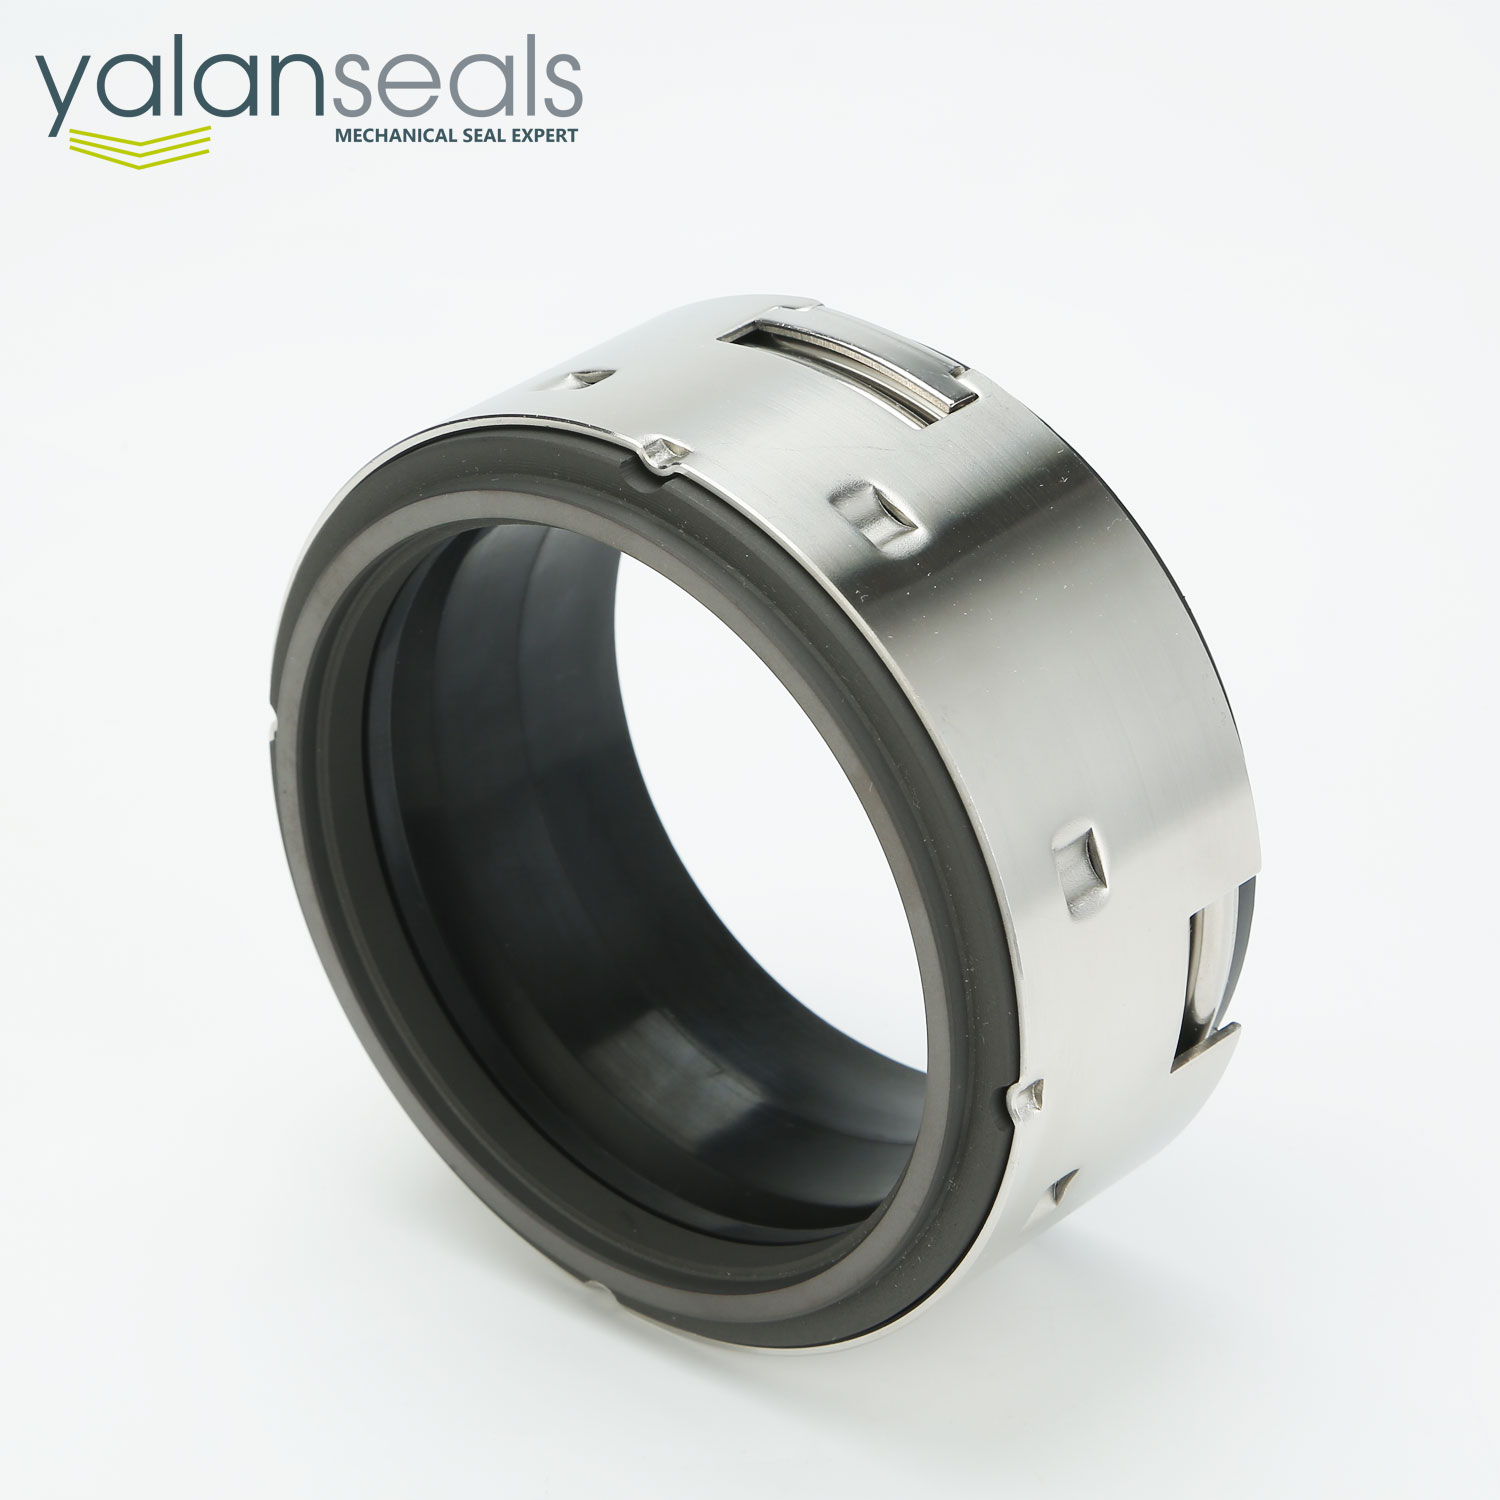 YALAN Type 502 Elastomer Bellow Mechanical Seal for Centrifugal Pumps, Compressors and Reaction Kettles